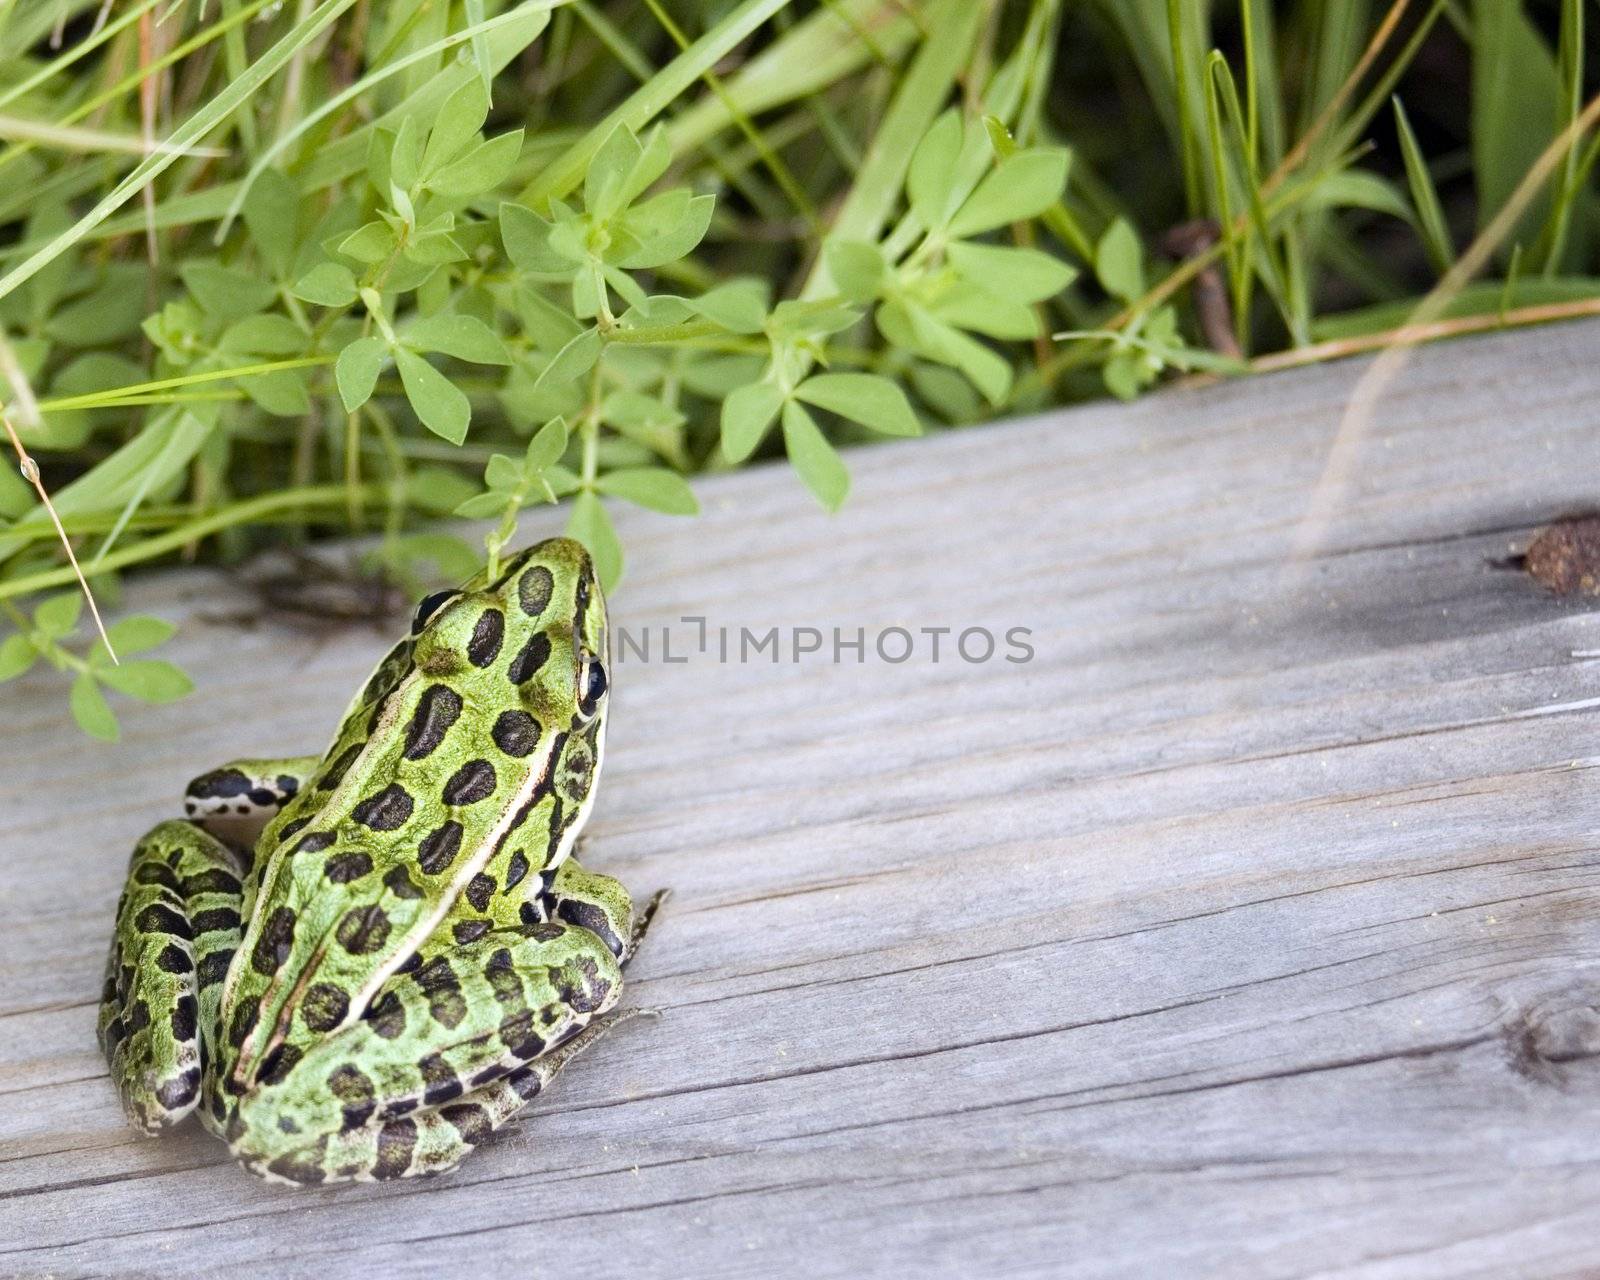 Leopard Frog by brm1949